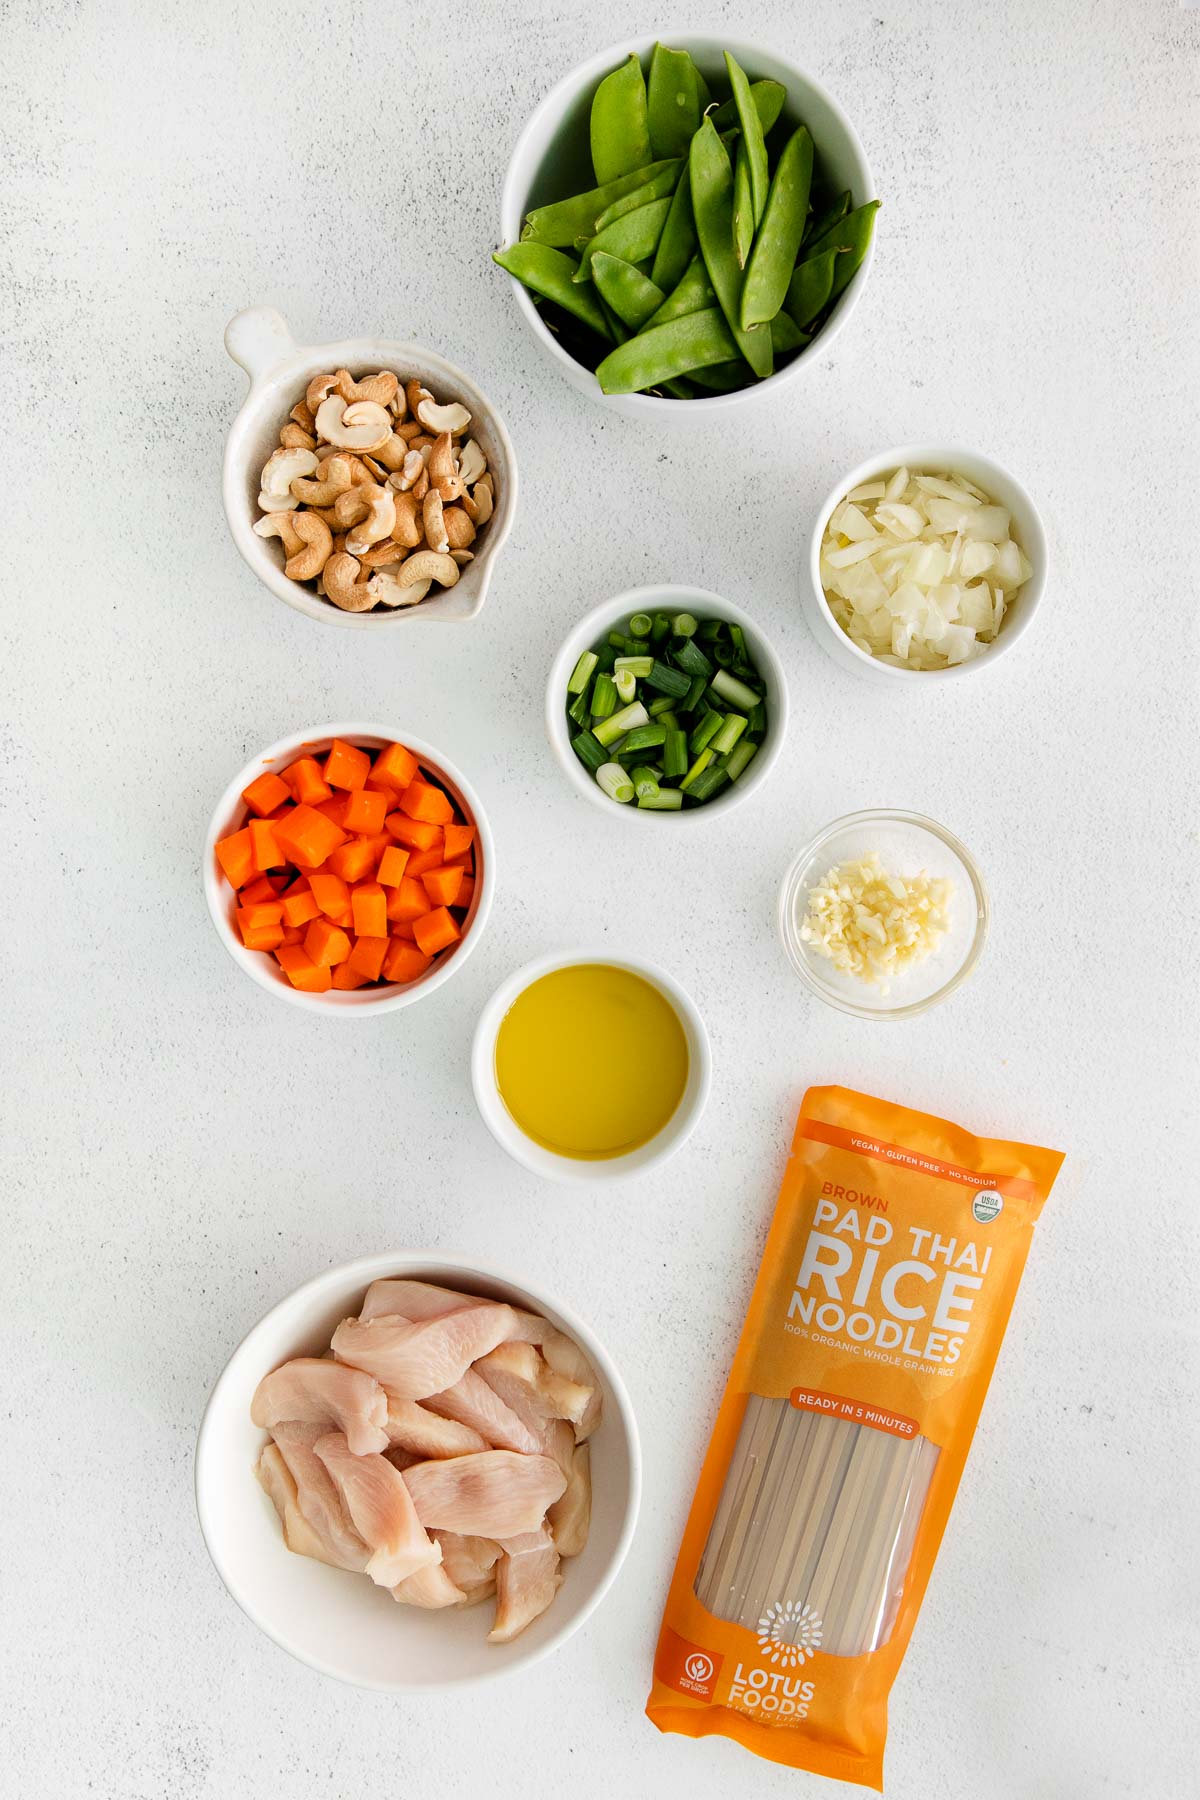 several white bowls with ingredients for cashew chicken stir fry - raw chicken, soy sauce, carrots, snow peas, cashews, garlic, onion and olive oil and a package of lotus foods brown rice noodles